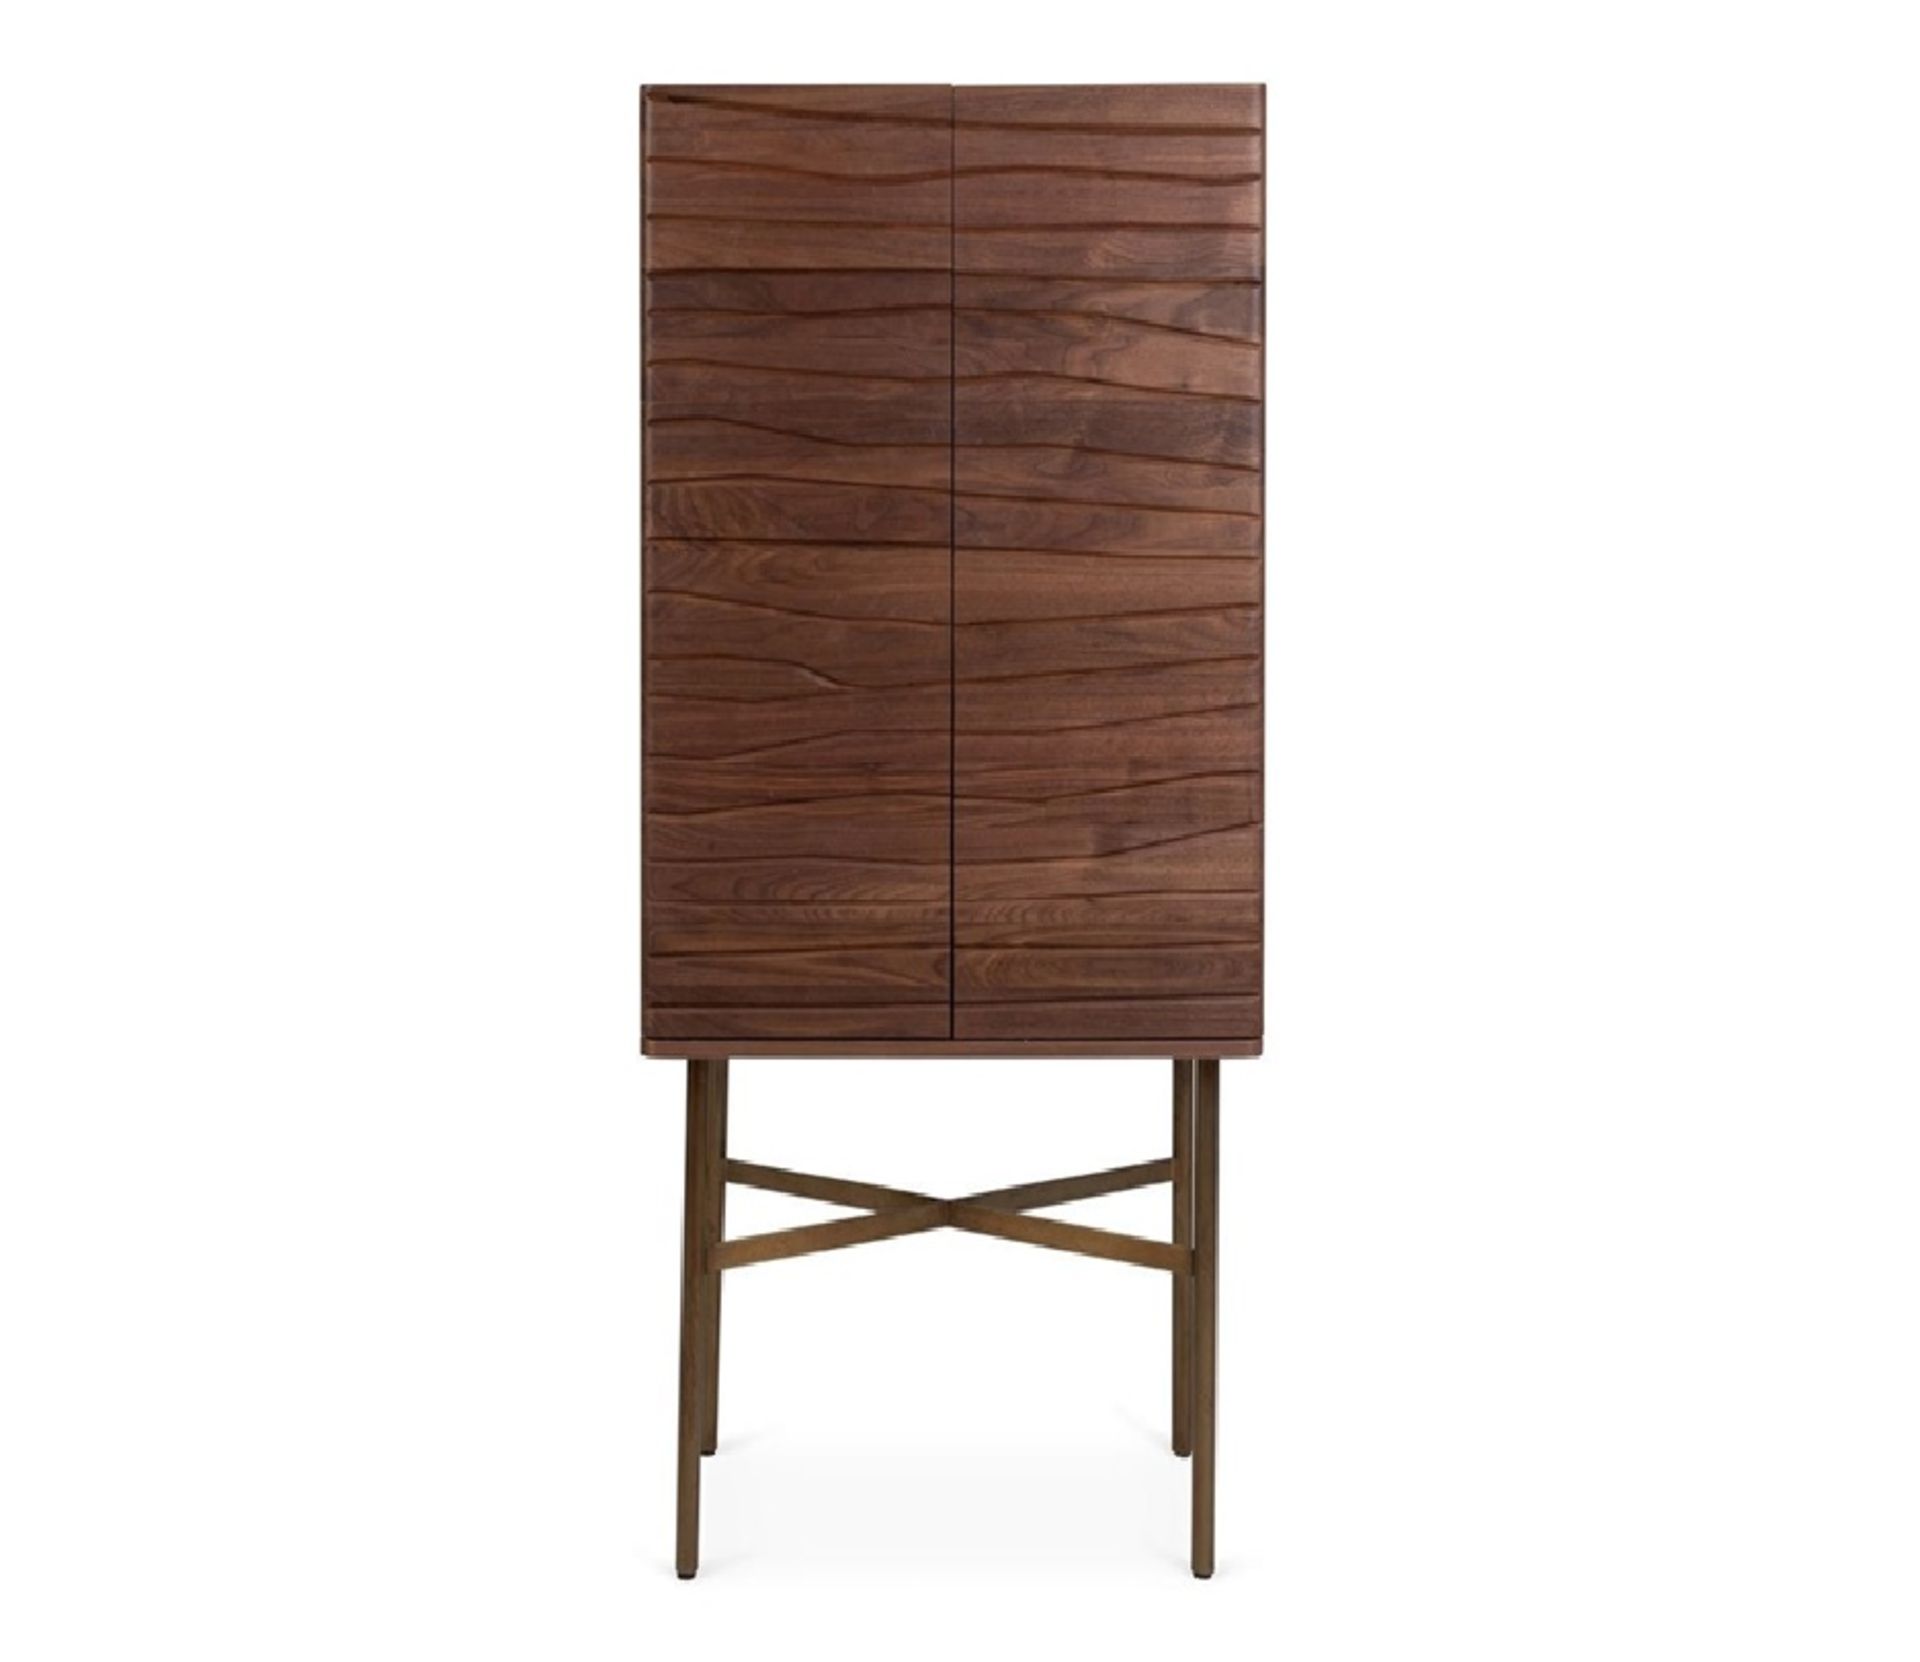 Benwest Cocktail Inspired By The Art Of Joinery, This Walnut Drinks Cabinet Is A Fusion Of - Image 2 of 2